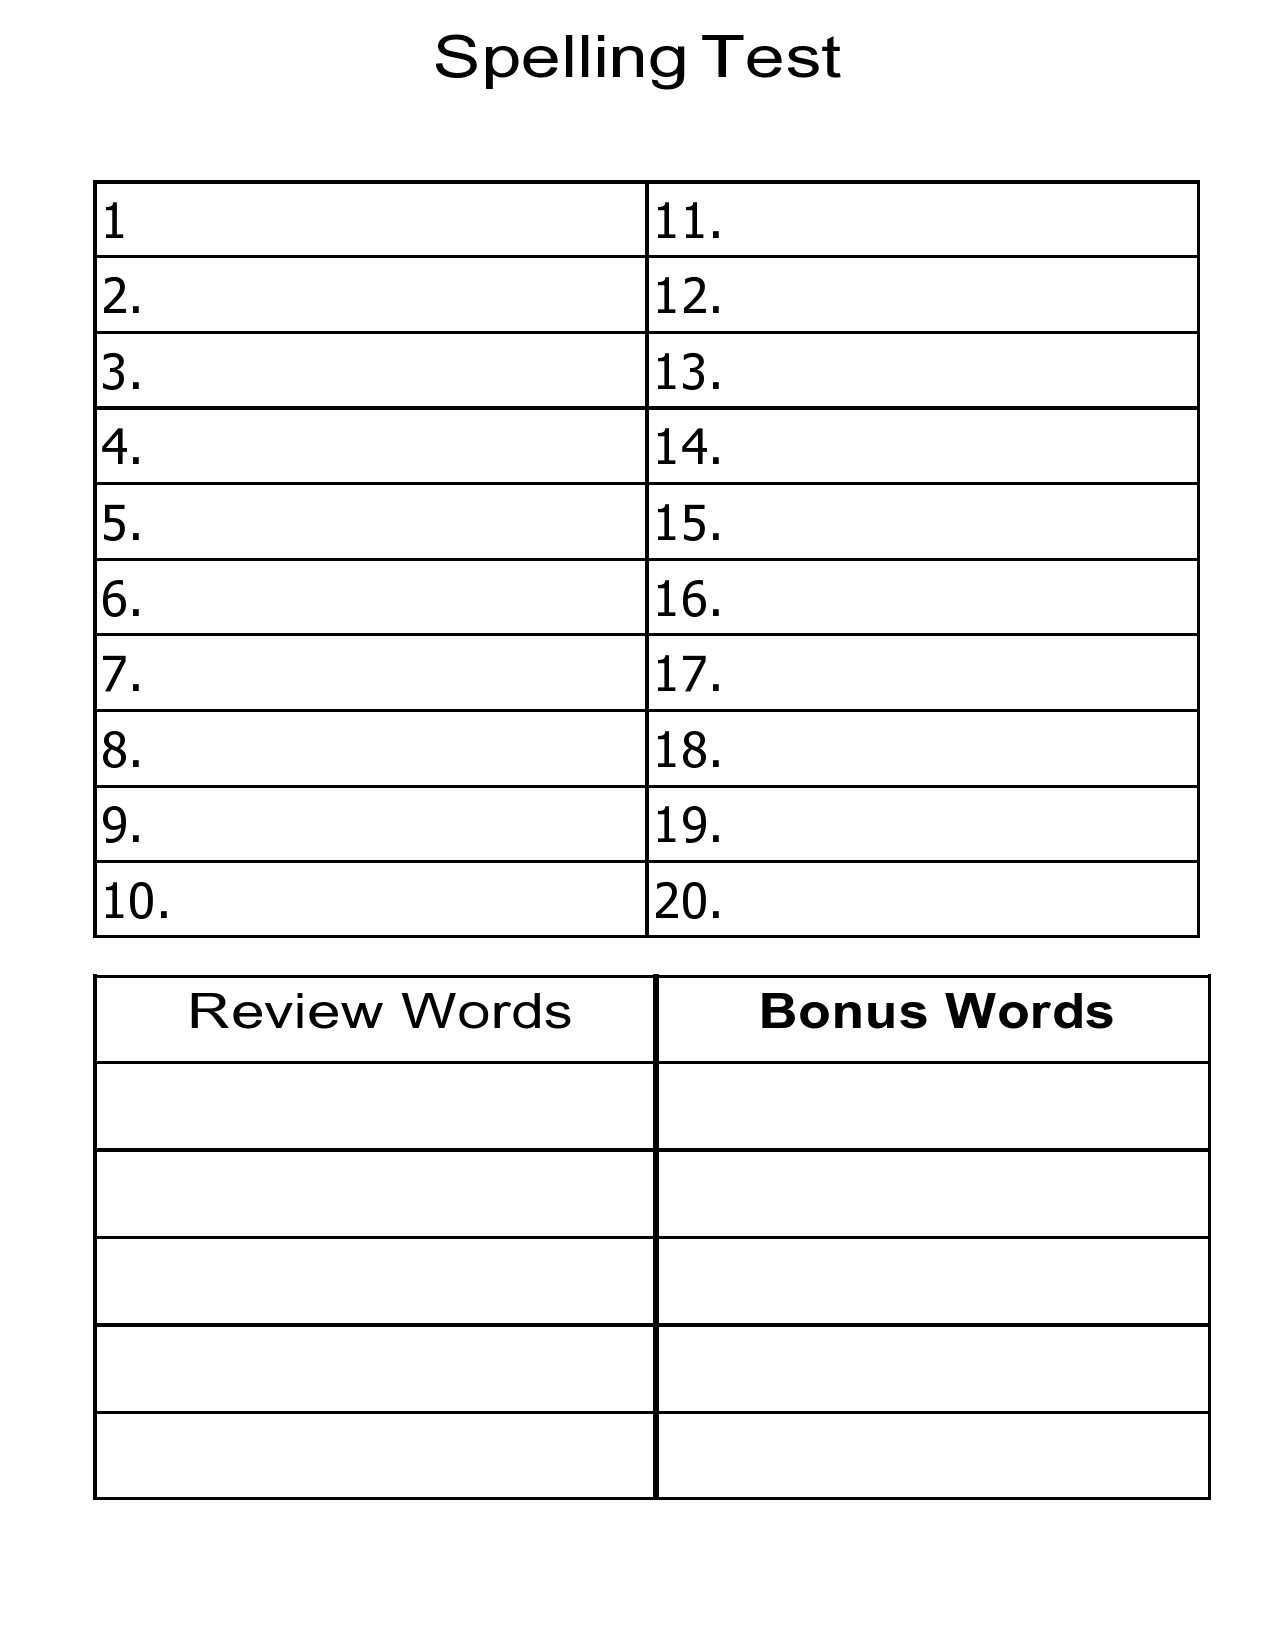 Free spelling test template 24